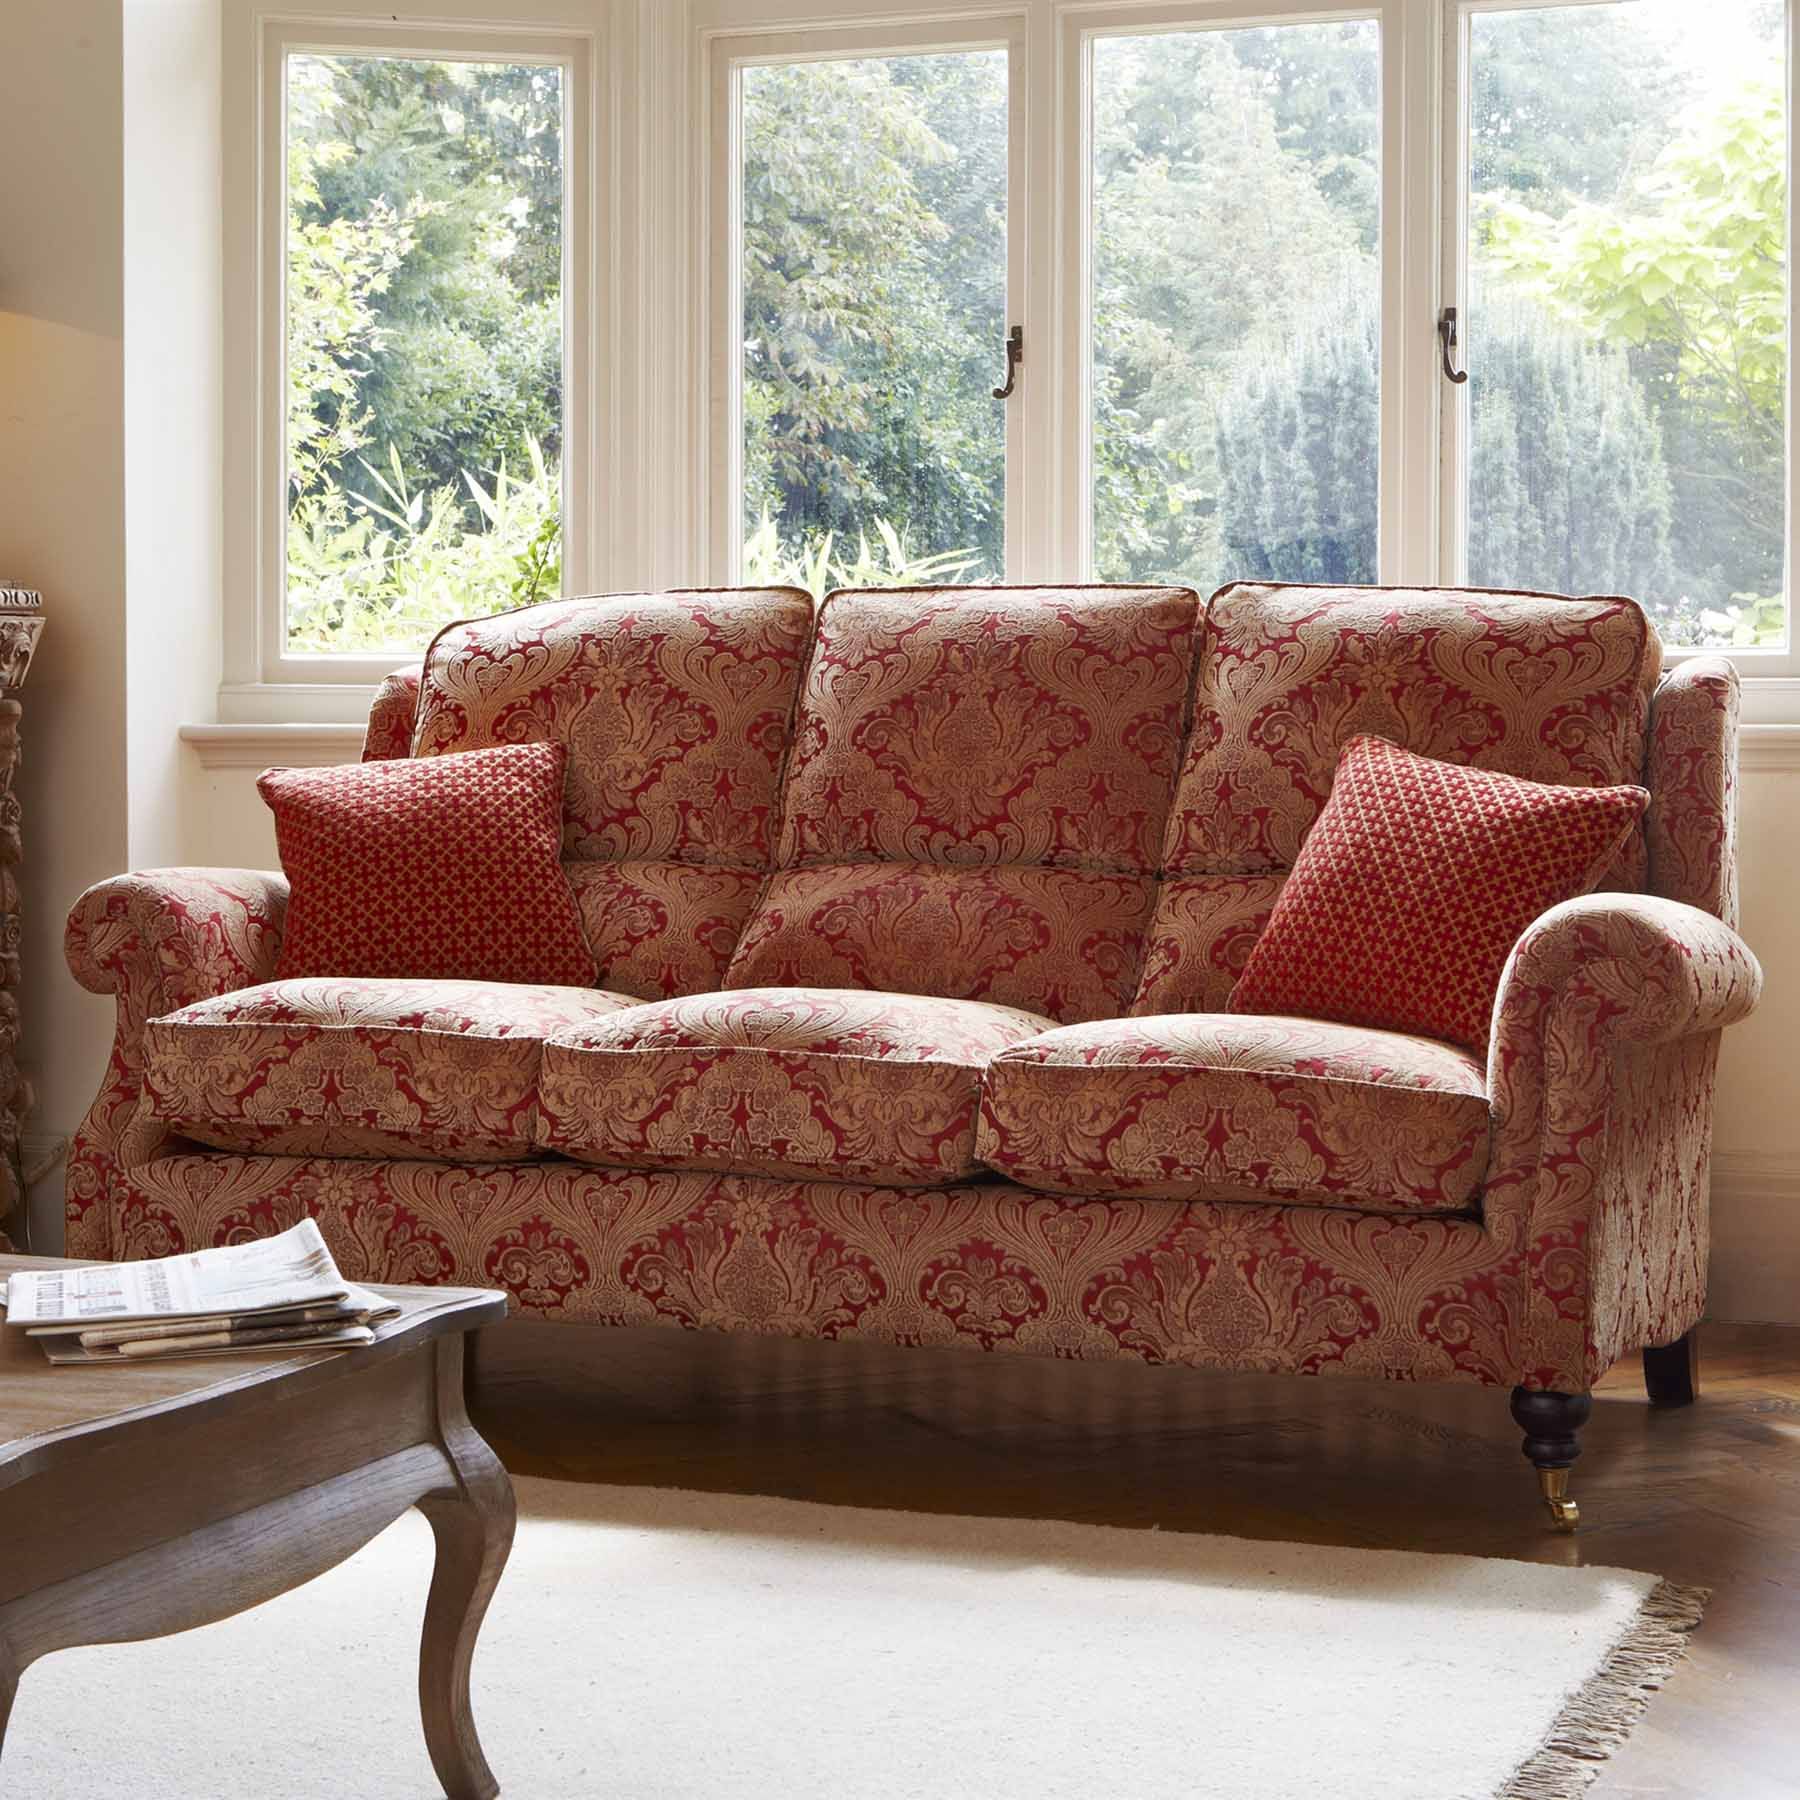 Parker Knoll Oakham 3 Seater Sofa – Tr Hayes Furniture Bath Throughout Traditional 3 Seater Sofas (Gallery 6 of 20)